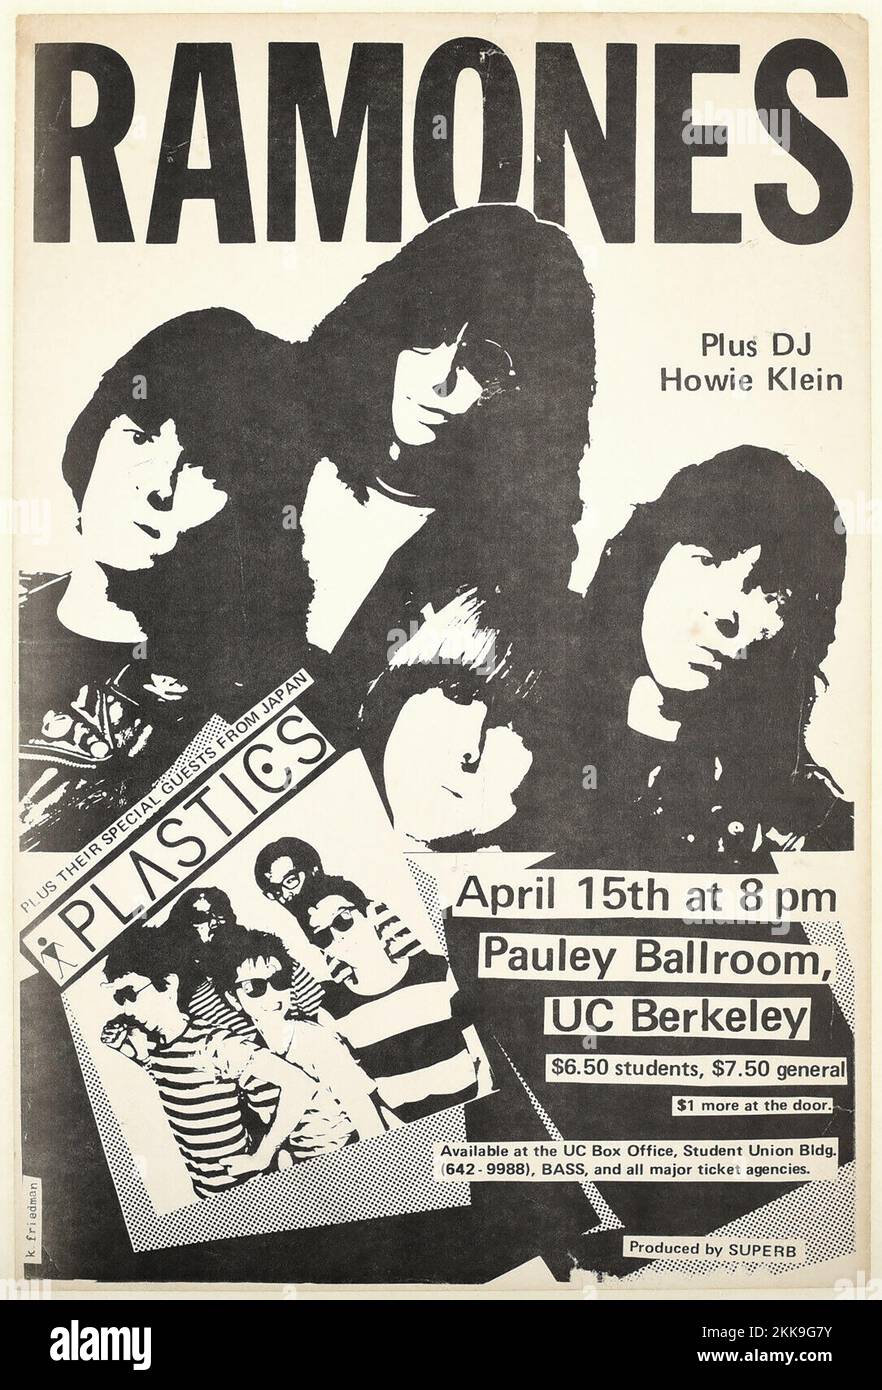 Ramones poster, 1980, Berkeley university campus, April. Cheaply printed in black on thick paper. Special guests The Plastics, from Japan. Design is very punk, cut up paper captions and text, bleached out photographs. Ramones were a seminal punk band, one of the pioneers of the music. Stock Photo